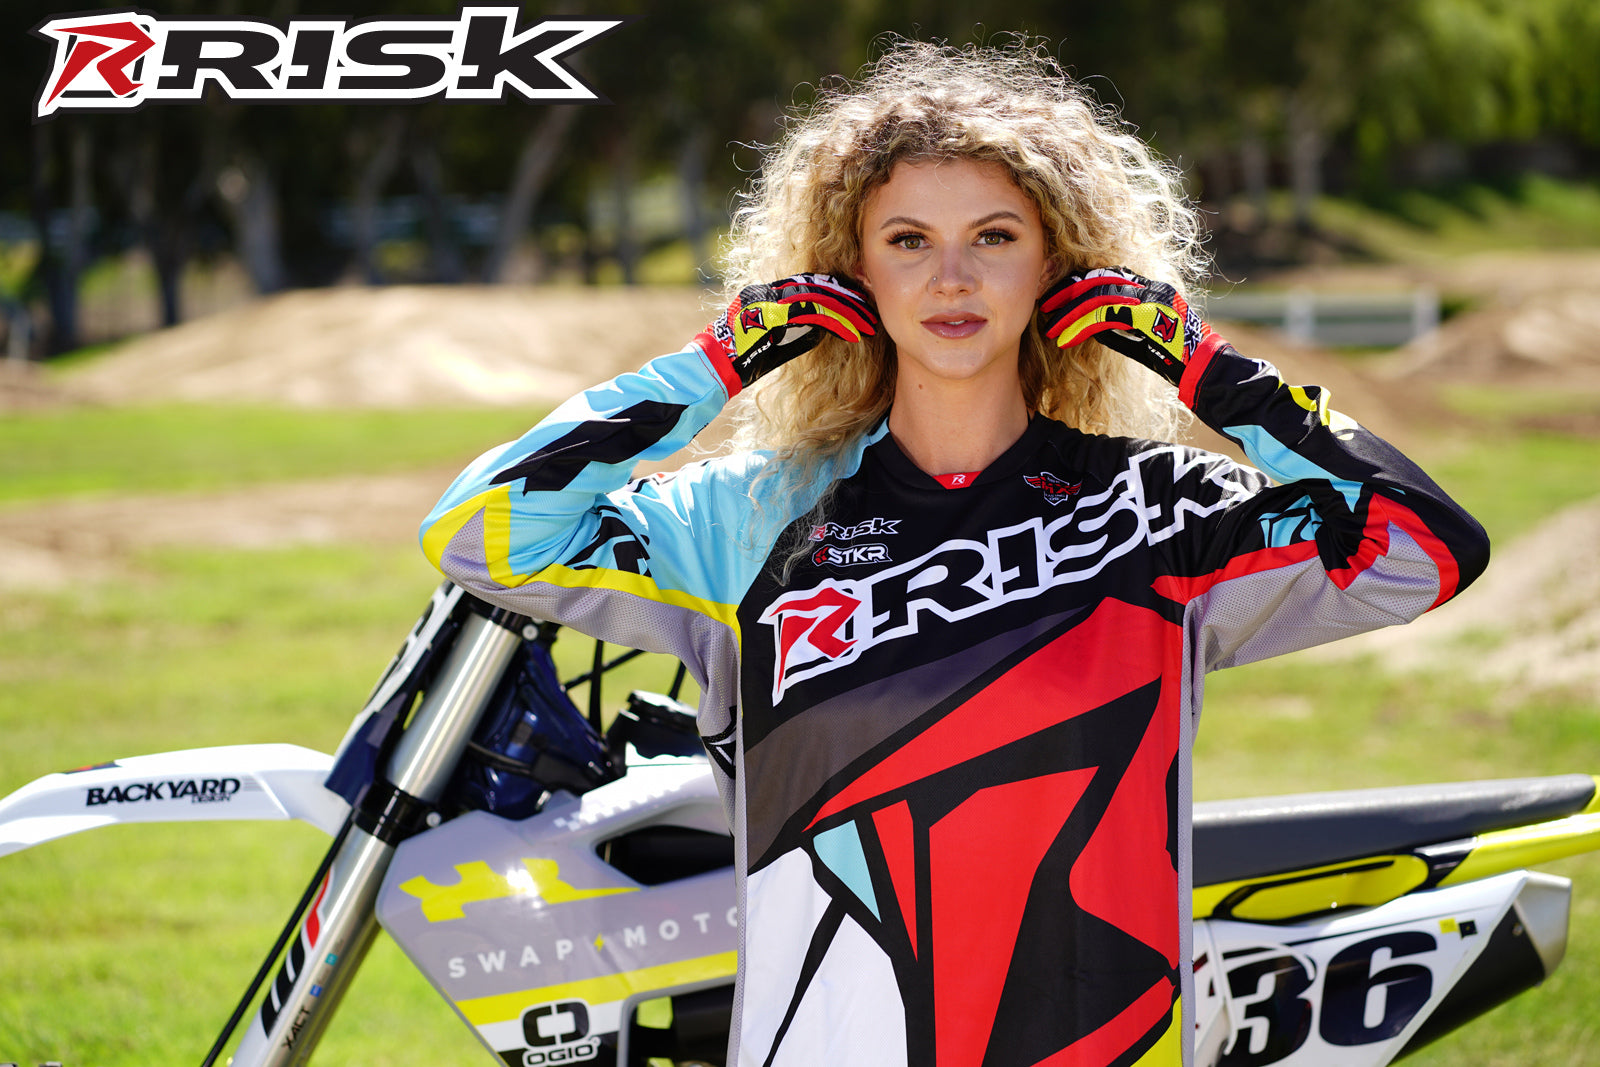 September's Risk Racing Moto Model Denna Lynn posing in various bikinis & Risk Racing Jerseys next to a dirt bike that's sitting on a Risk Racing ATS stand - Pose #12